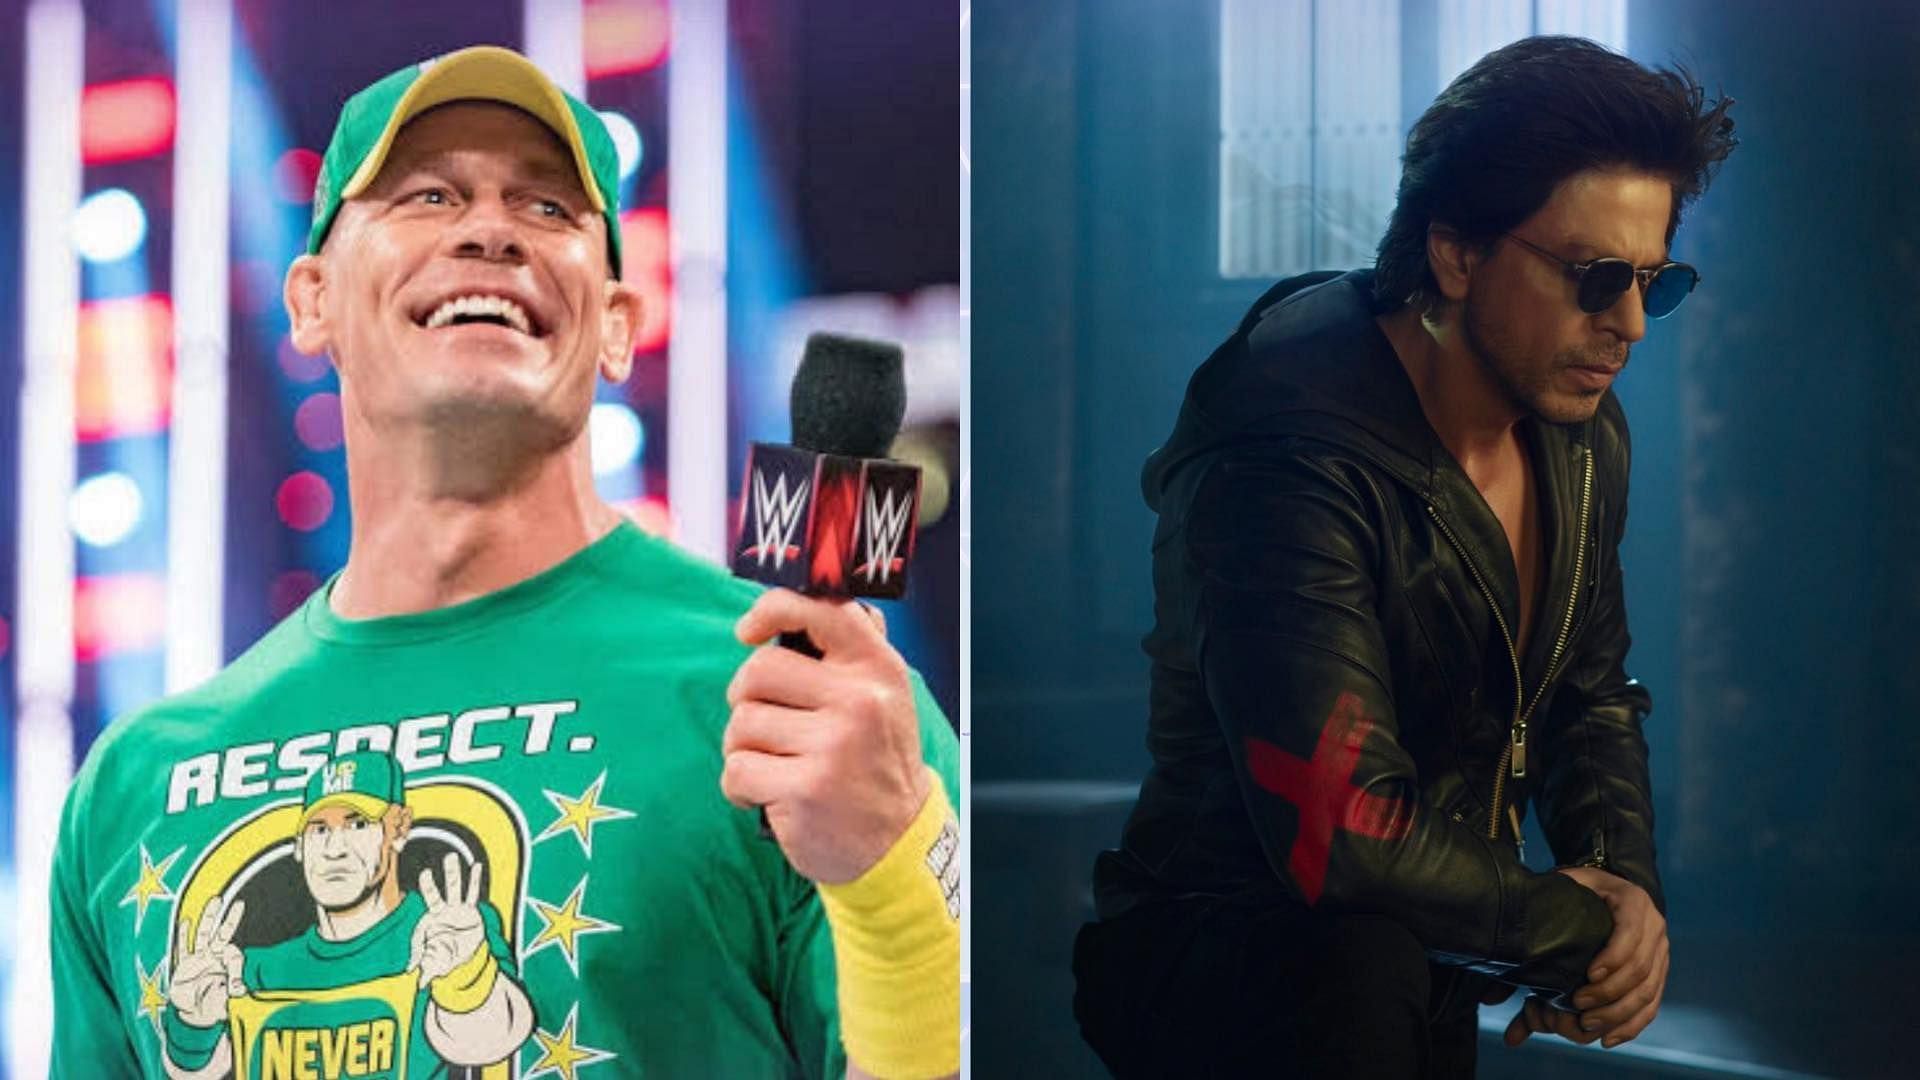 John Cena and Shah Rukh Khan in picture